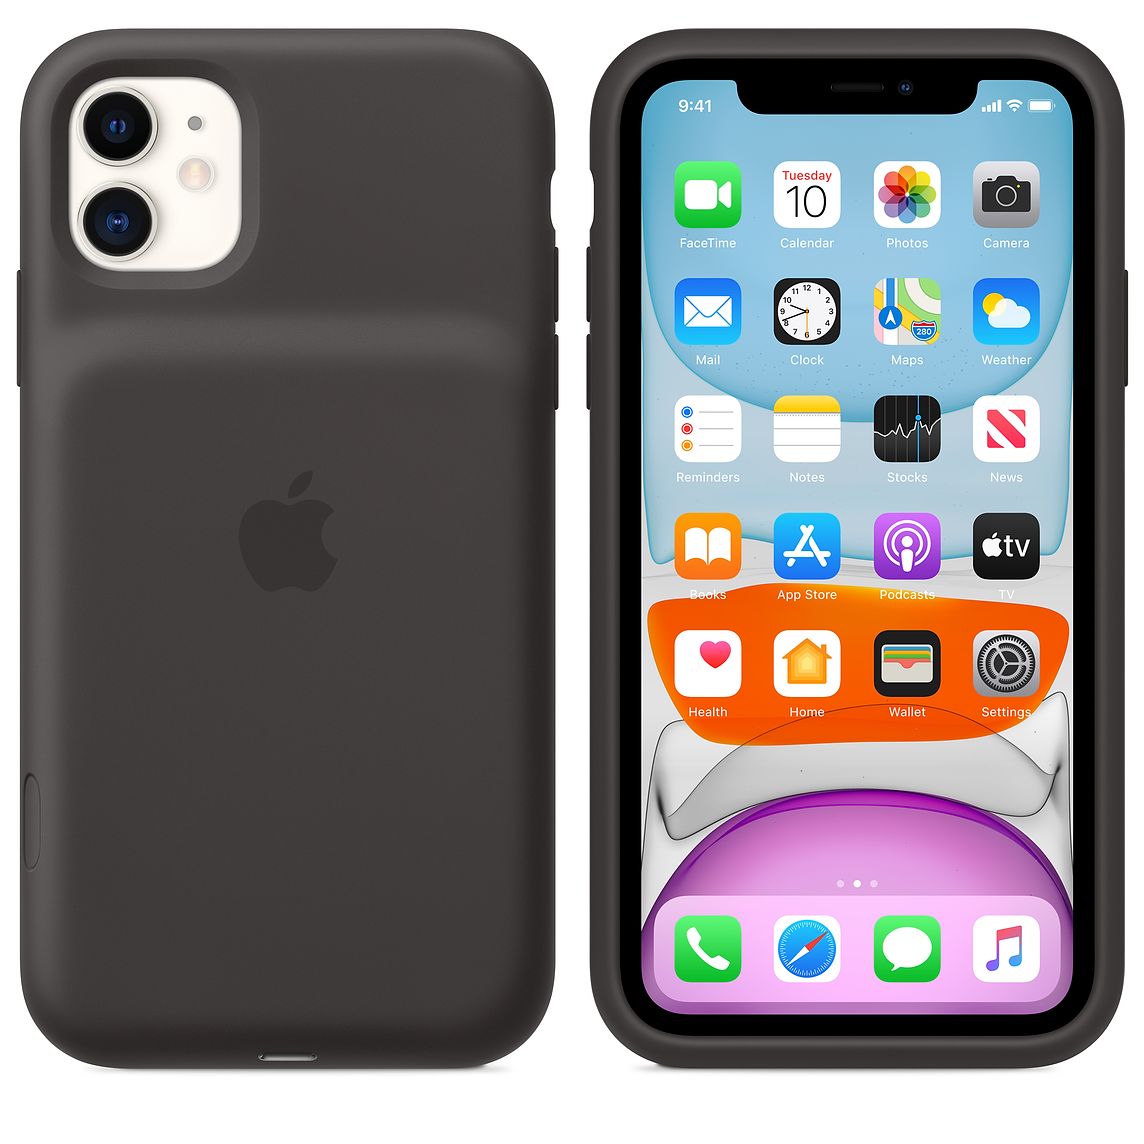 Apple Releases New Smart Battery Case With Dedicated Camera Button for iPhone 11/Pro/Max